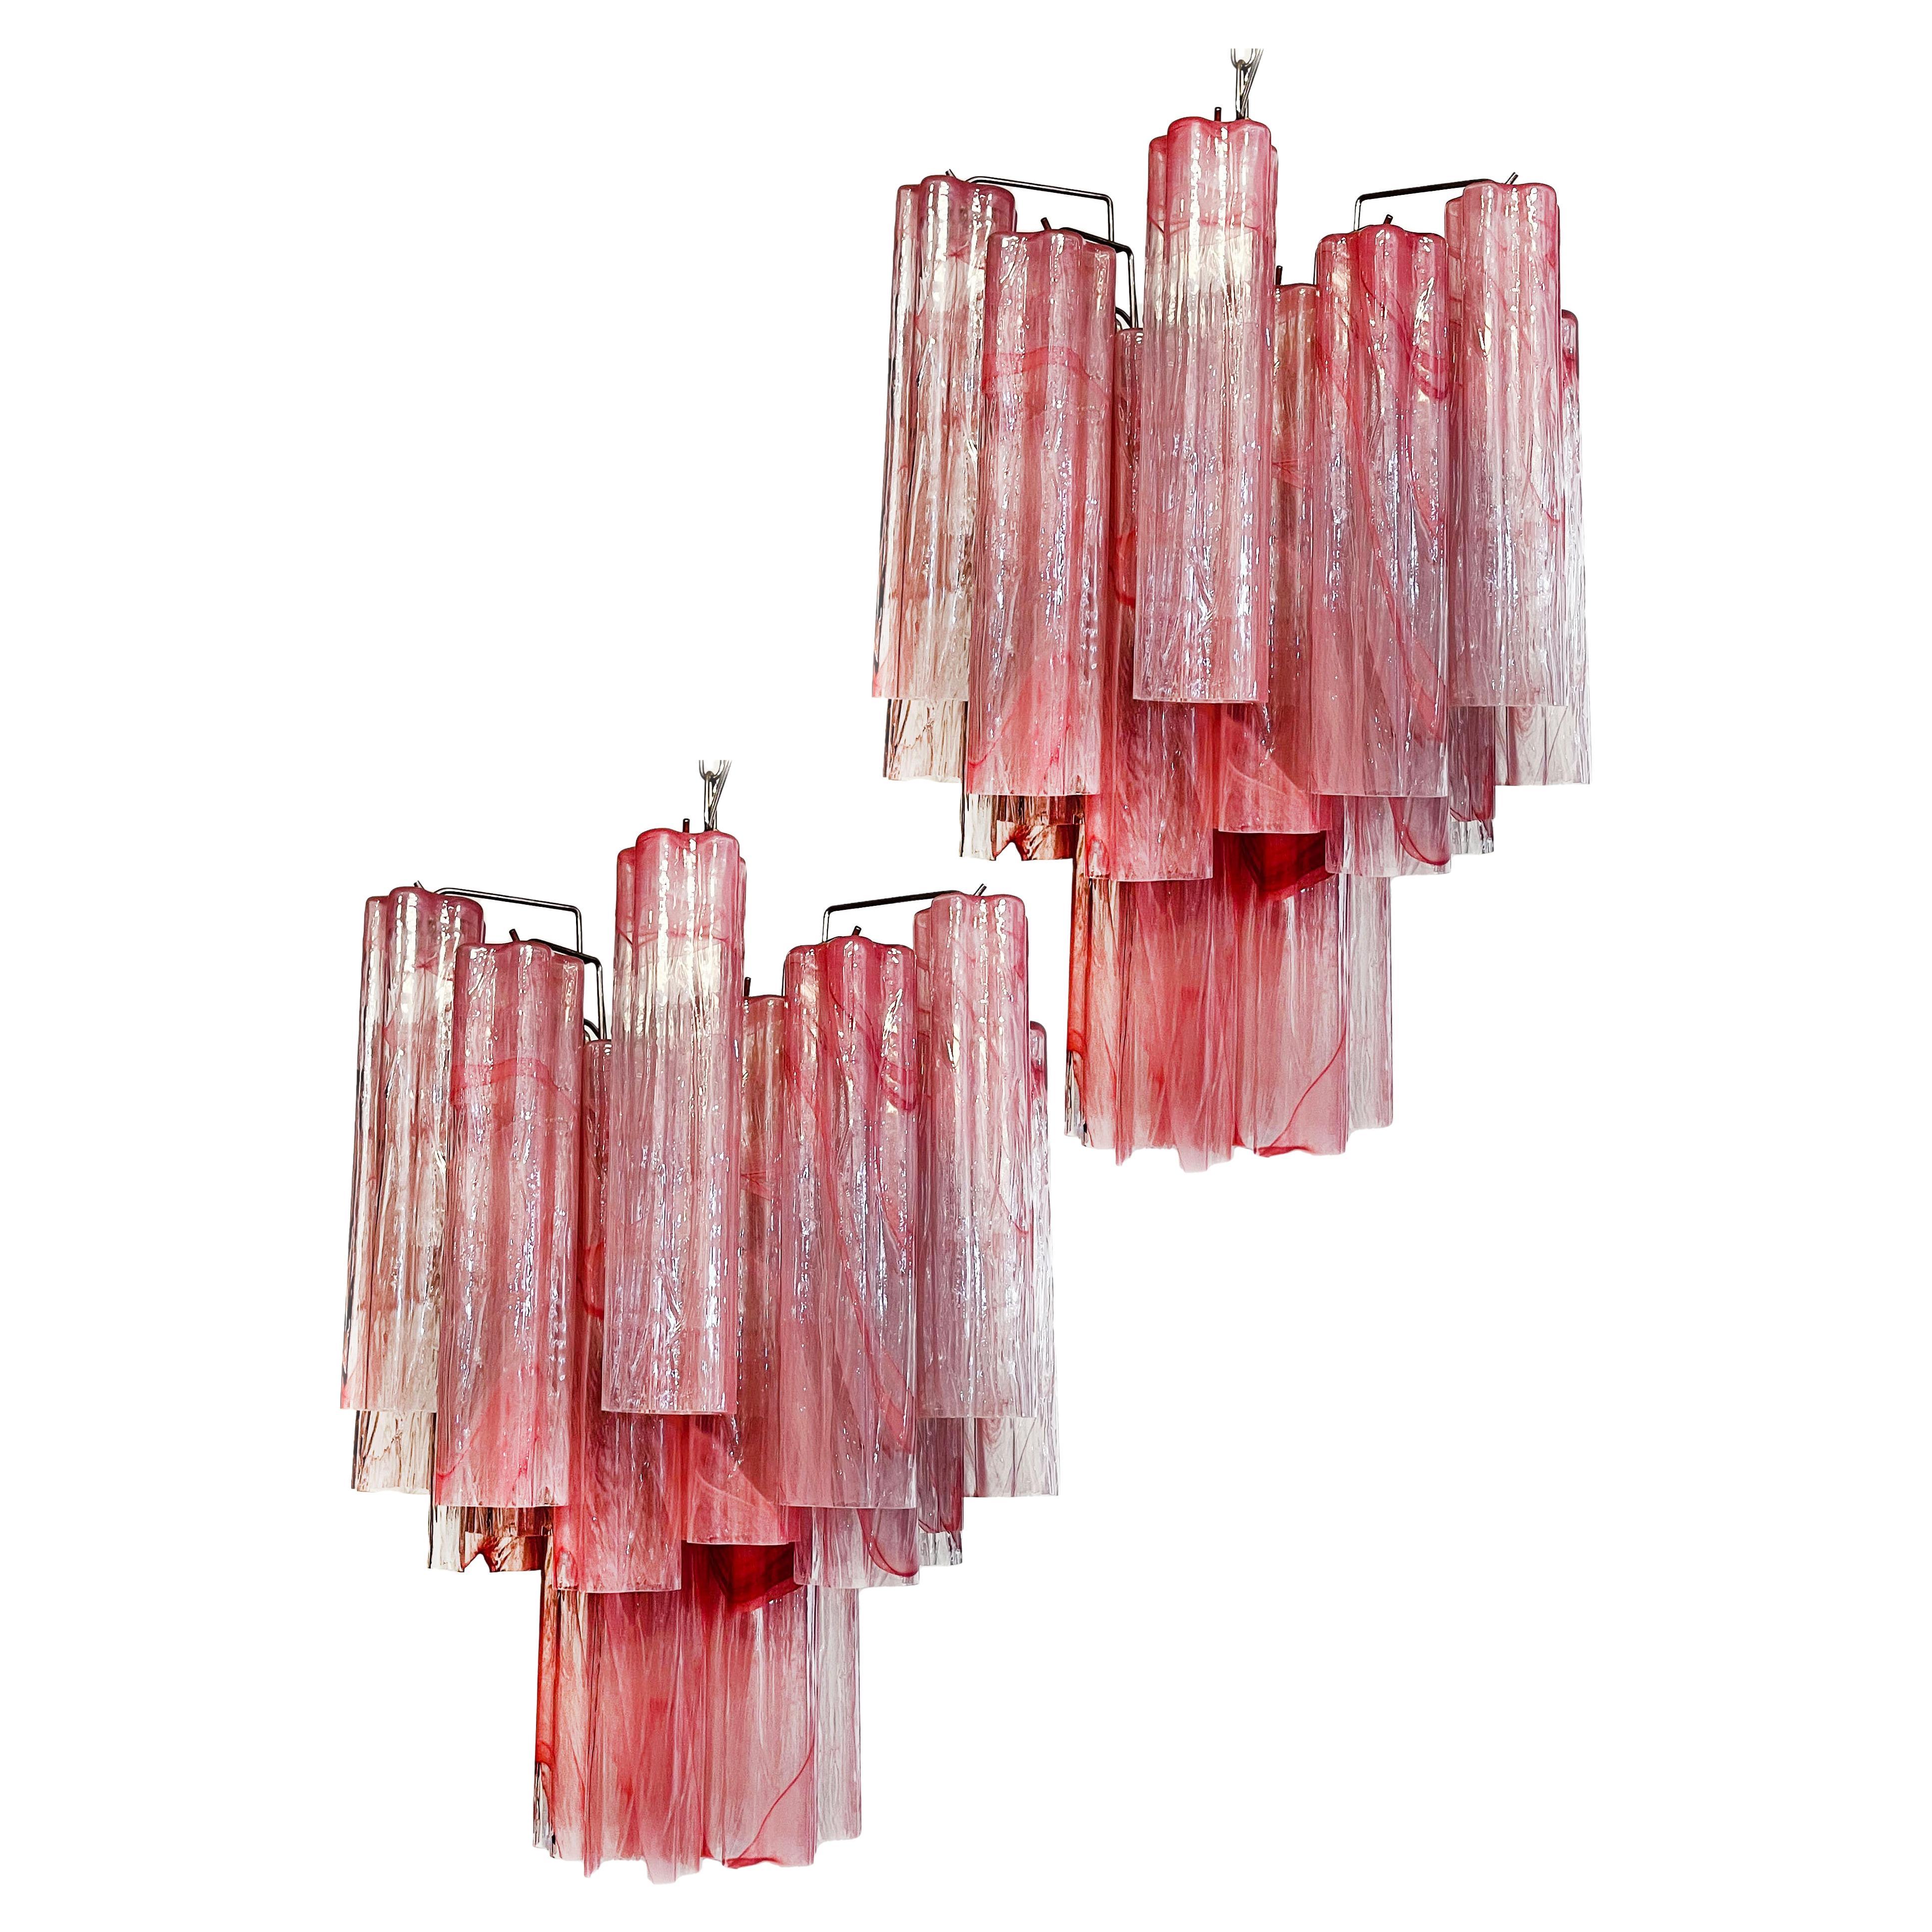 Charming Glass Tube Chandeliers, 30 Albaster Pink Glasses